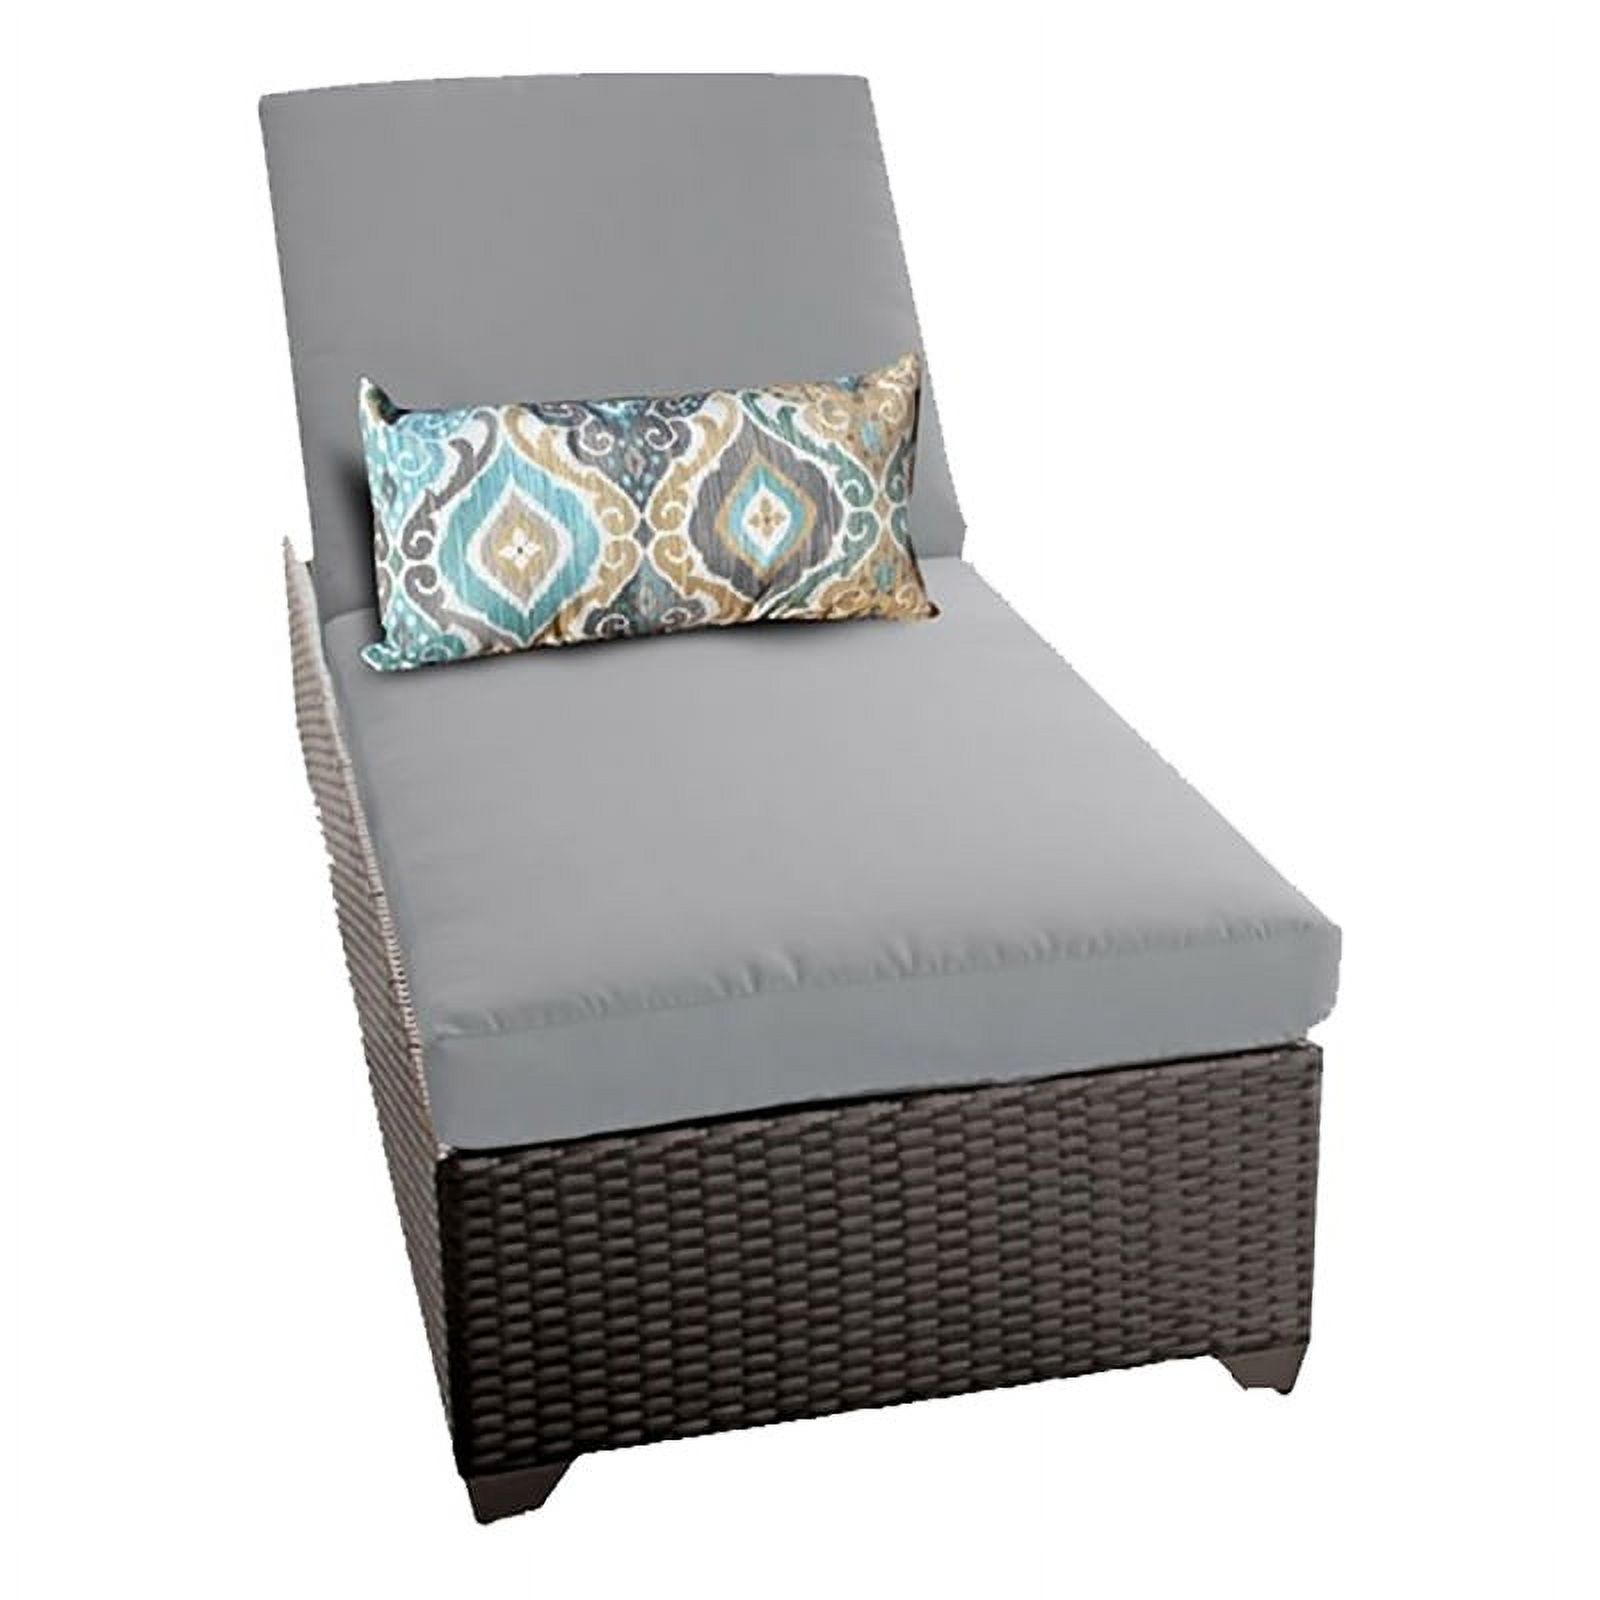 Bowery Hill Wicker/Fabric Patio Chaise Lounge in Gray/Espresso - image 1 of 2